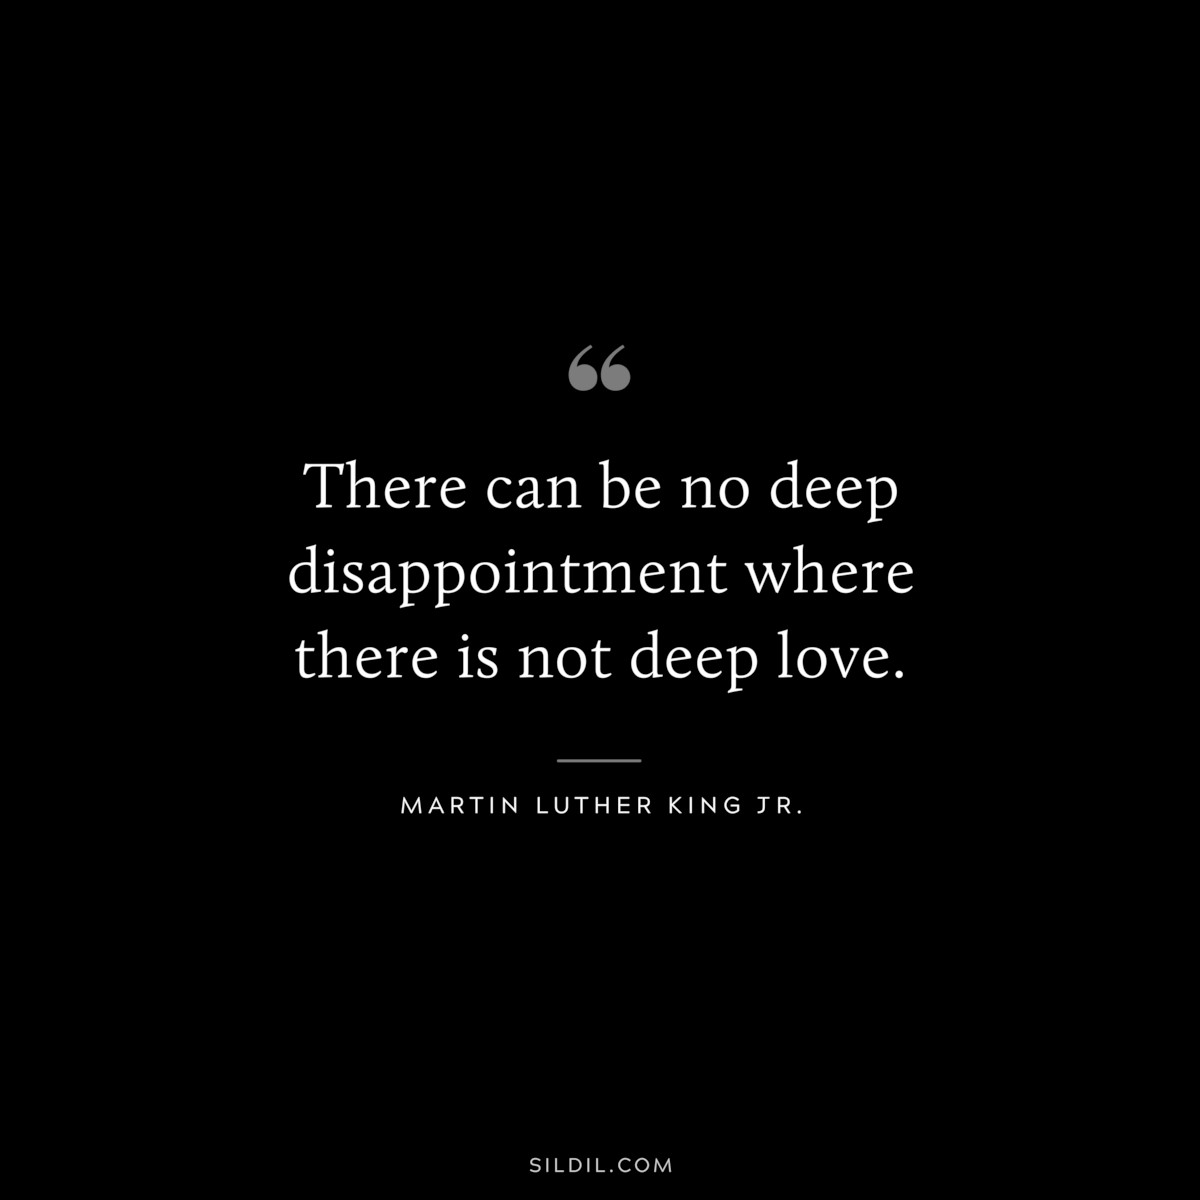 There can be no deep disappointment where there is not deep love. ― Martin Luther King Jr.